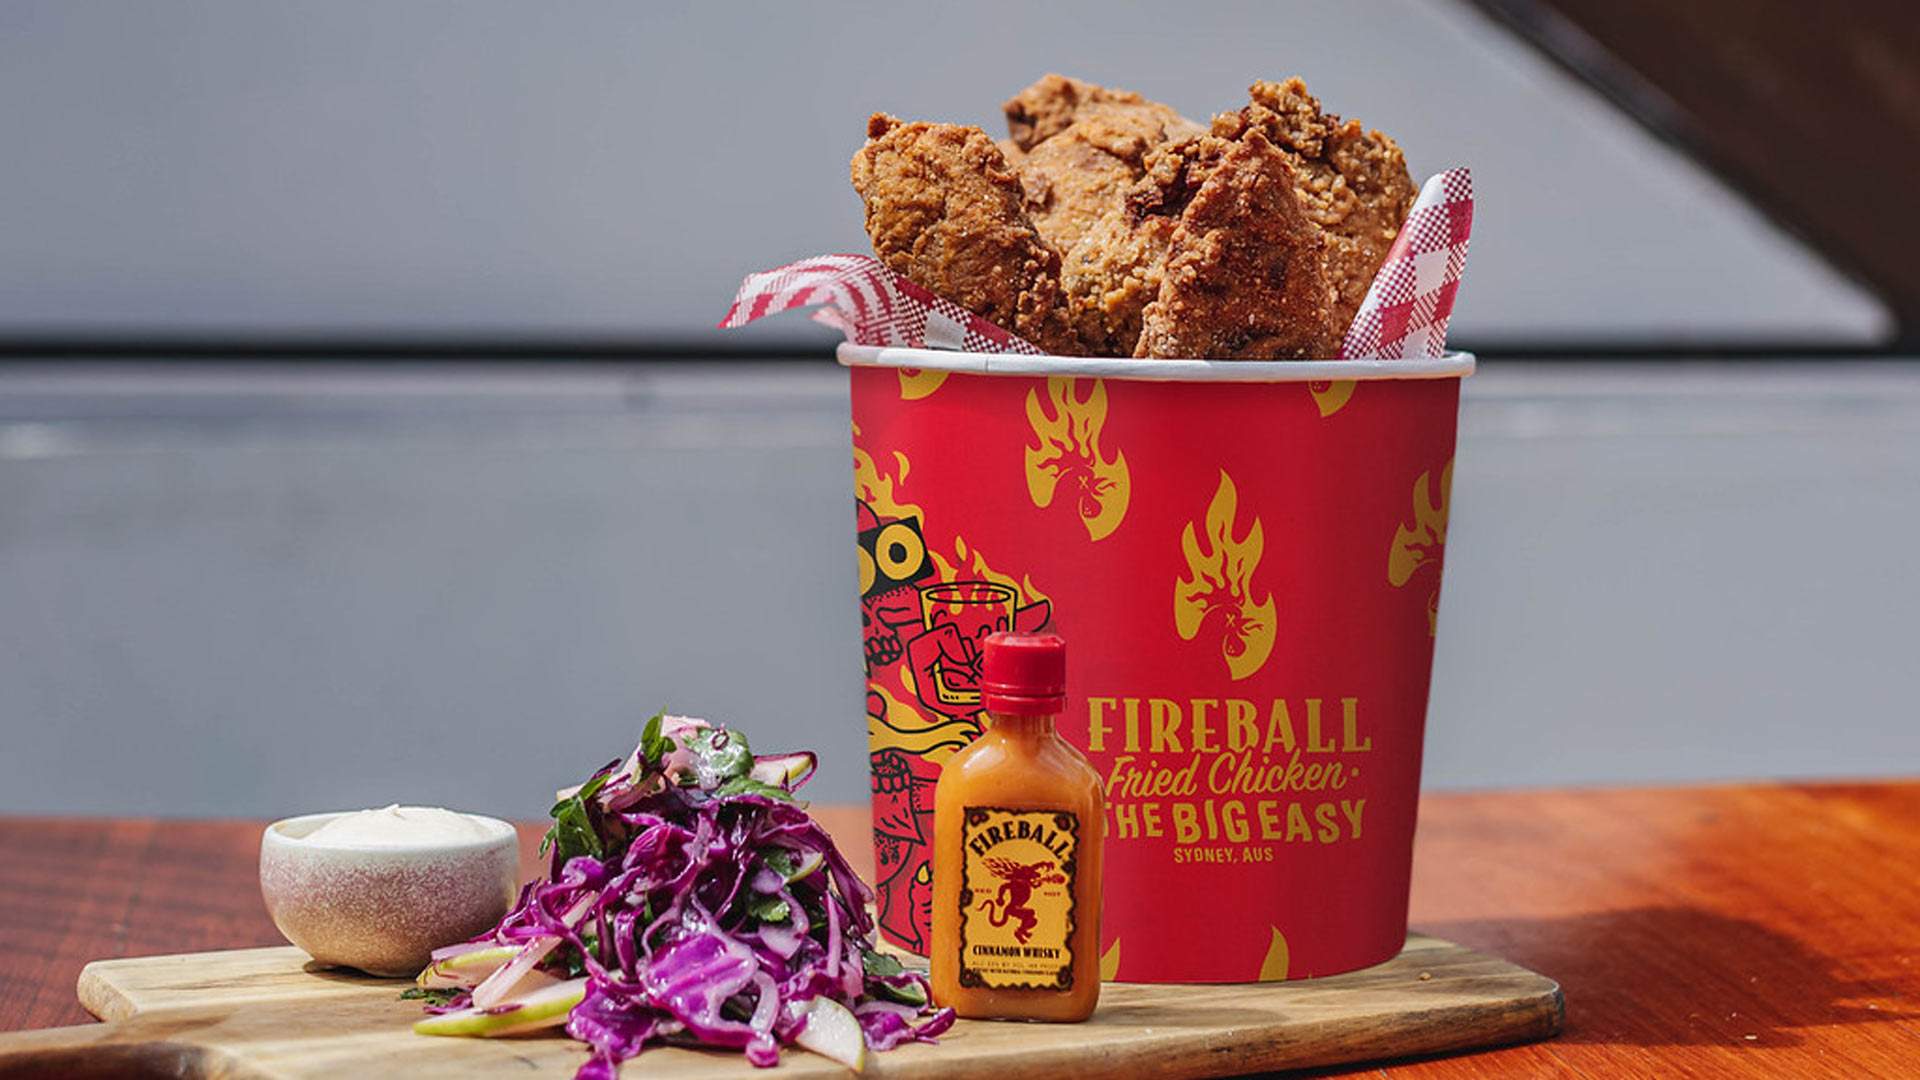 Darlinghurst Bar The Big Easy Is Delivery Big Buckets of Fireball-Spiked Fried Chicken